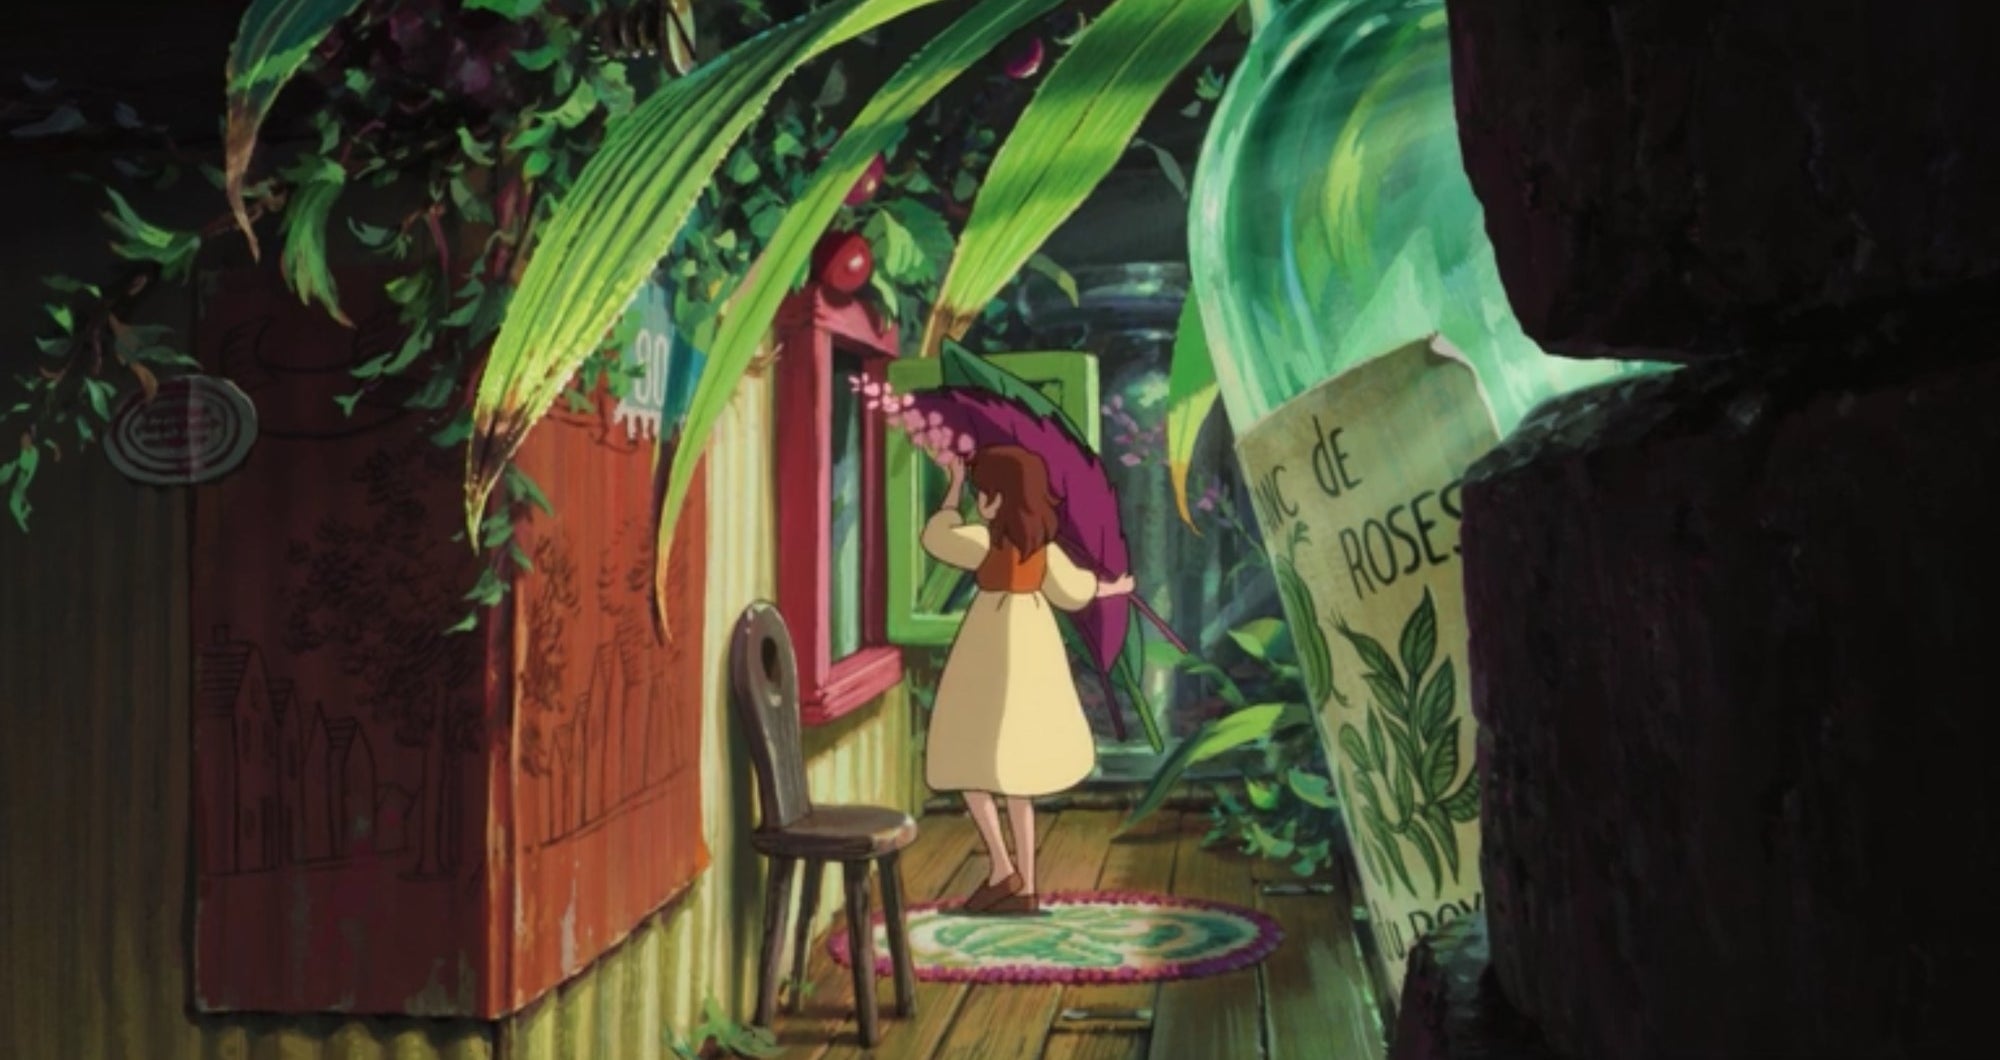 A girl in a lushly decorated hallway